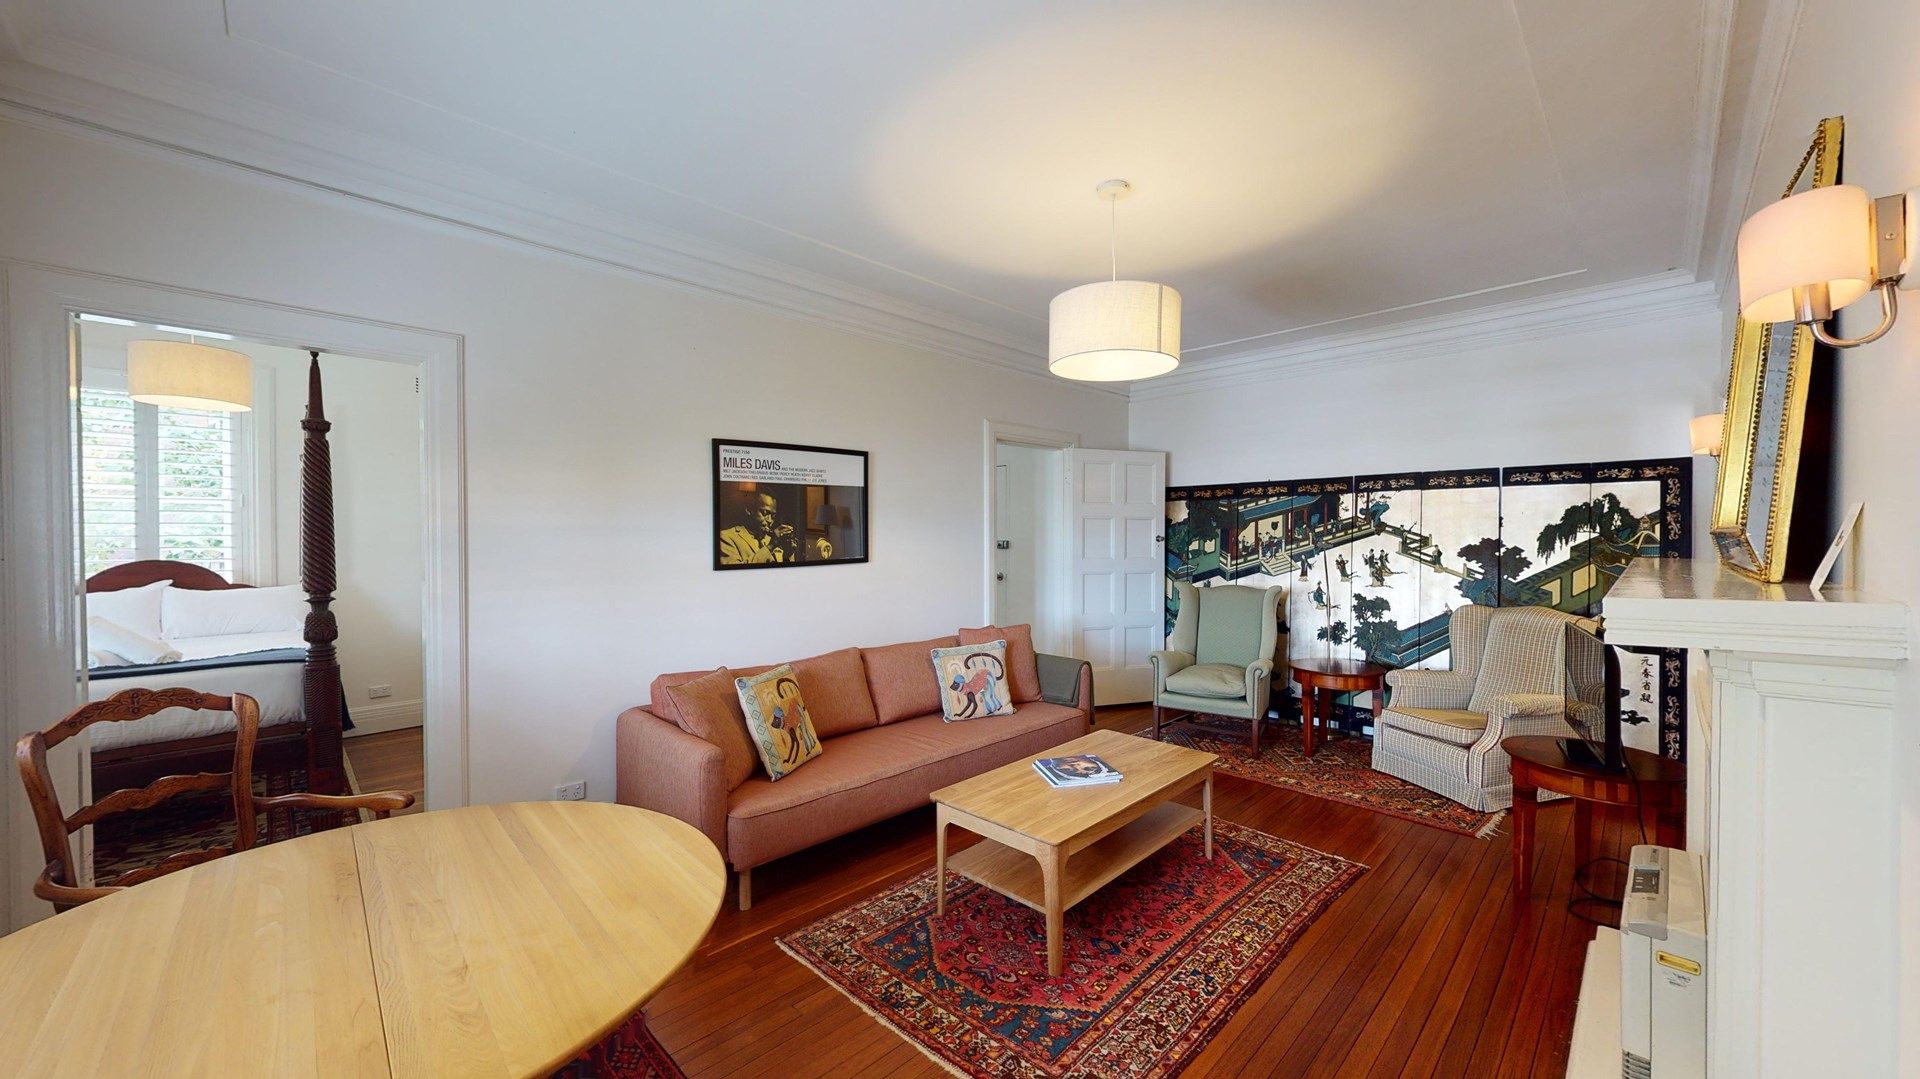 2 bedrooms Apartment / Unit / Flat in 10/166 New South Head Road, WOOLLAHRA NSW, 2025